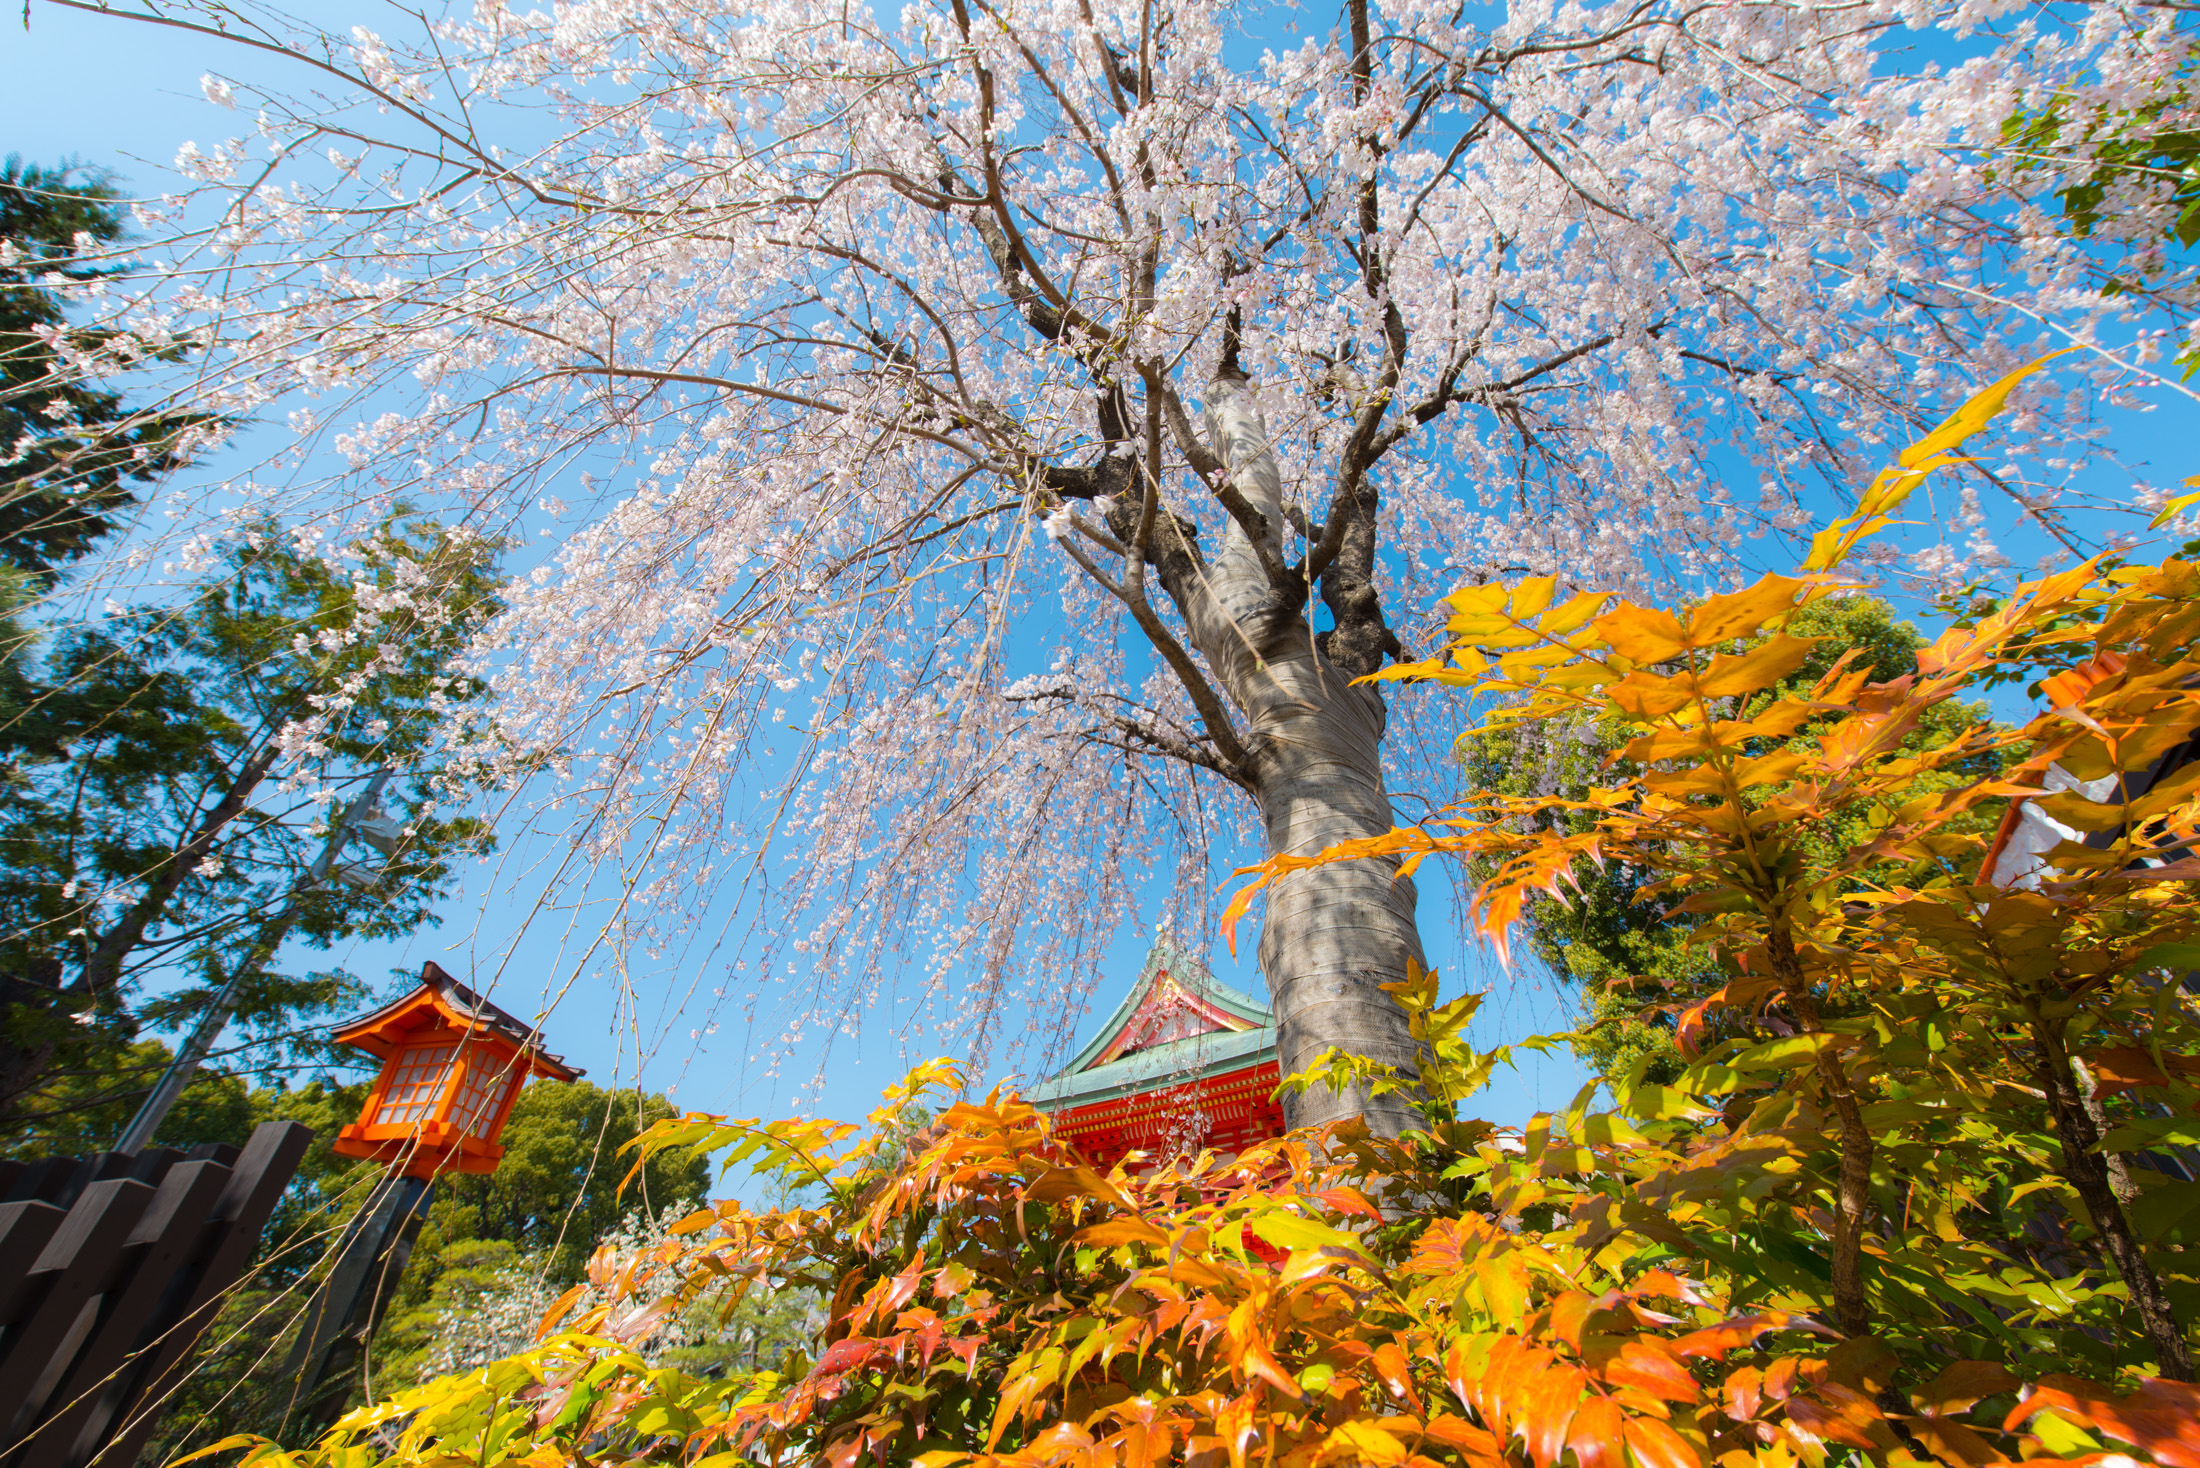 Cherry Blossom Beauty in Tokyo: A vibrant display of nature and culture in Japan.